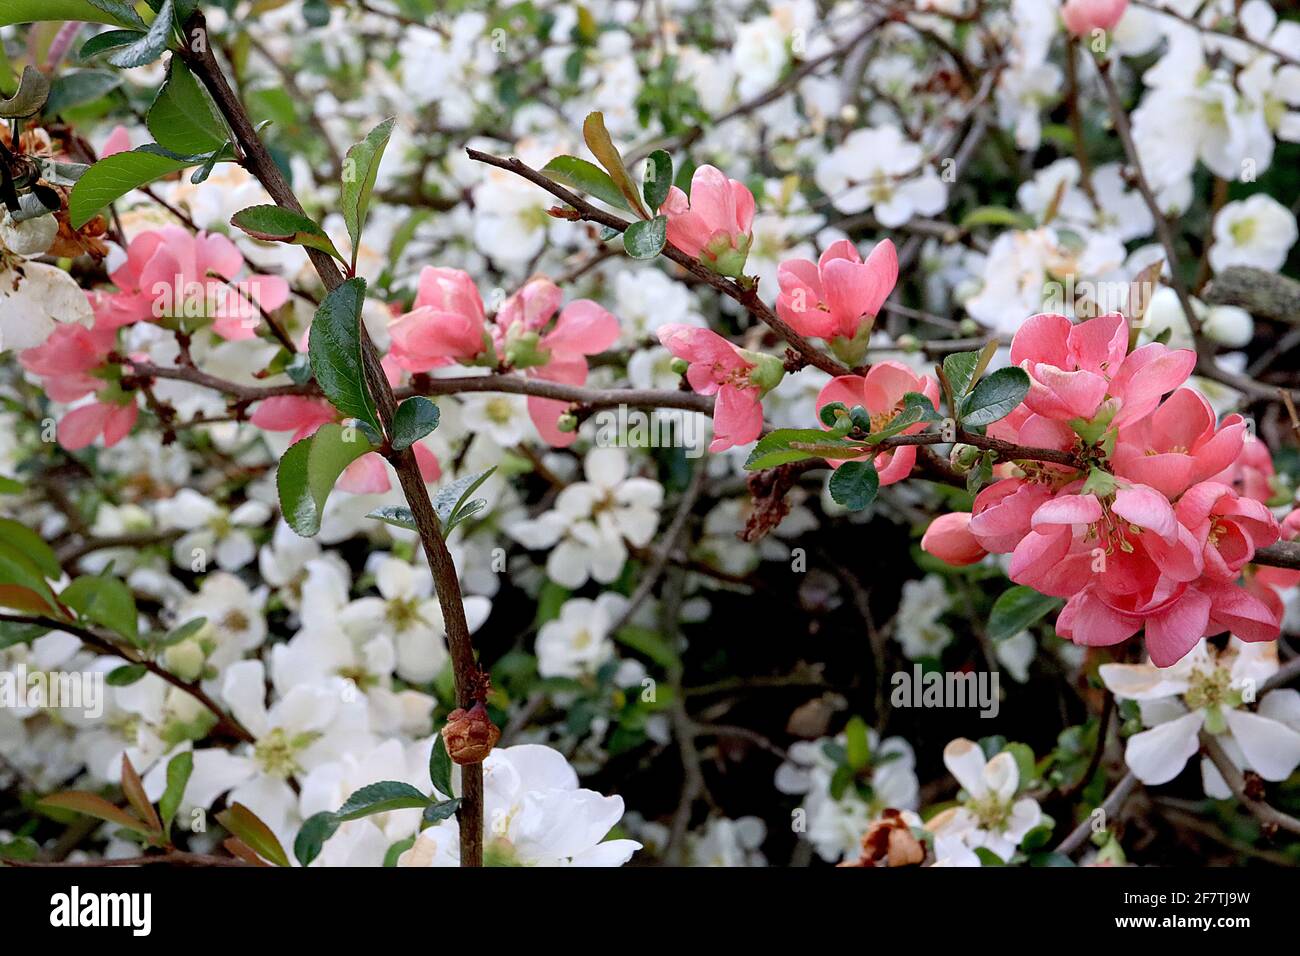 Chaenomeles speciosa ‘Eximia’ Japanese flowering quince Eximia – coral pink flowers and small ovate leaves,  April, England, UK Stock Photo